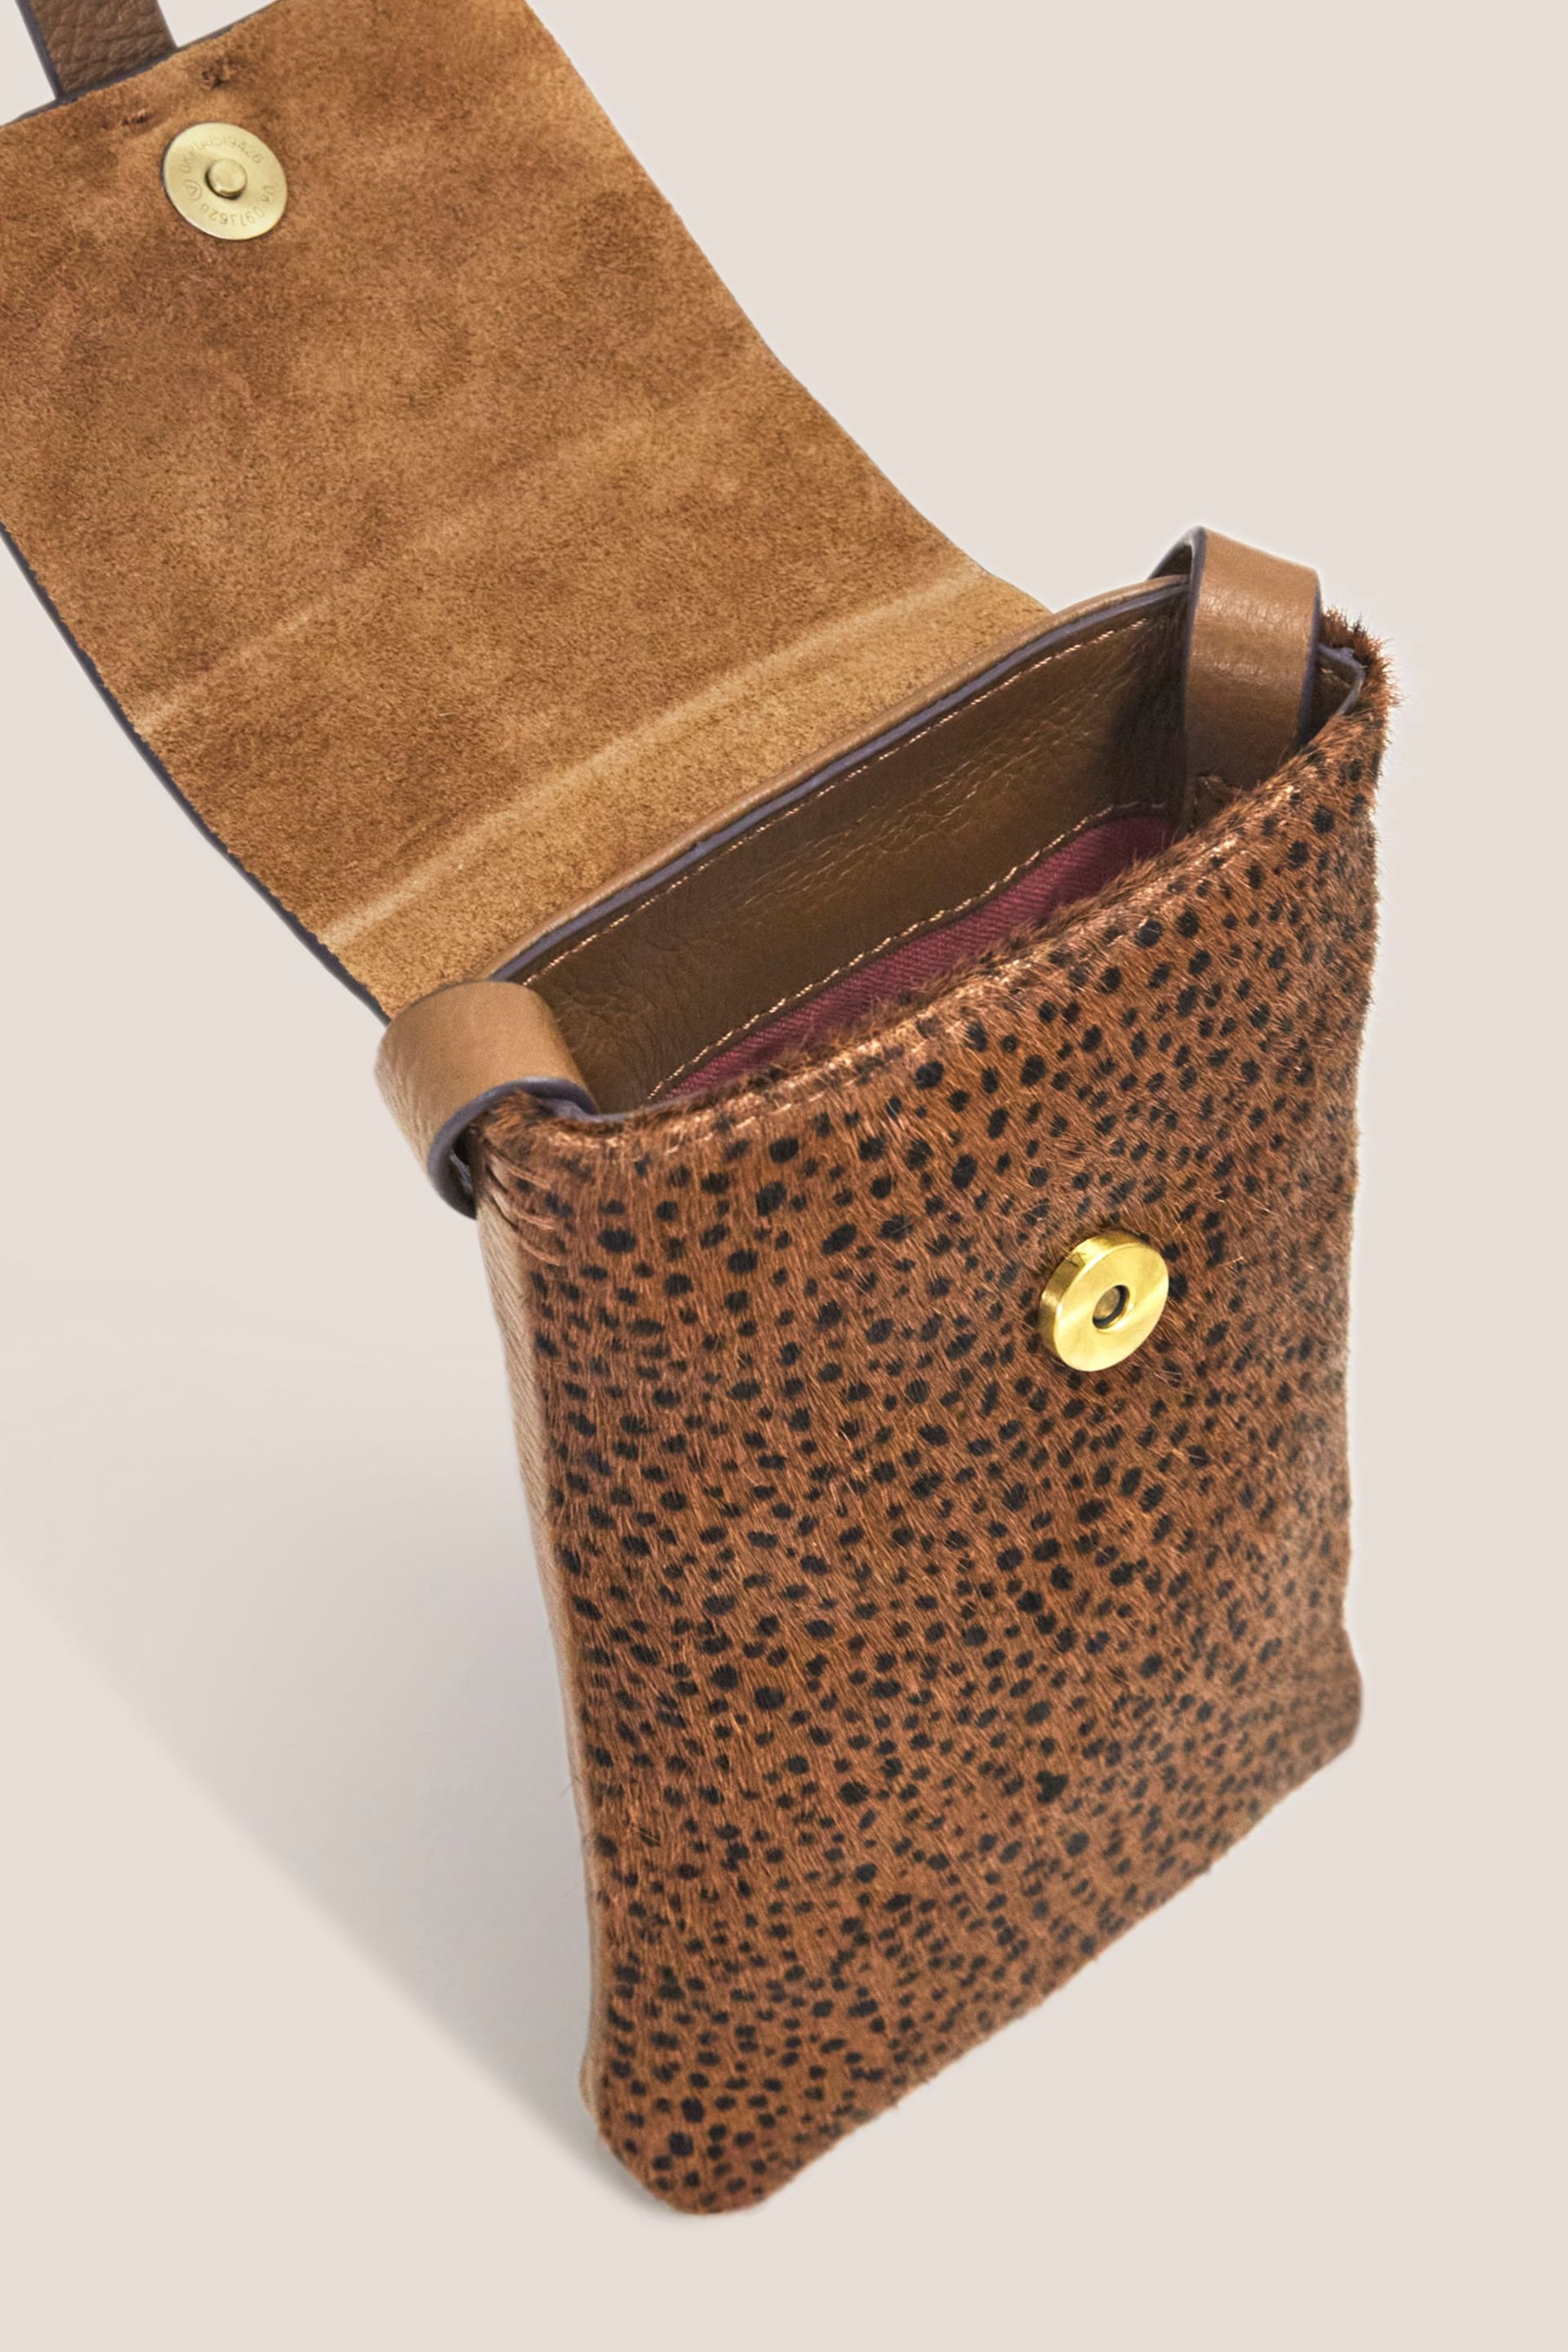 White Stuff Brown Clara Buckle Leather Phone Bag - Image 3 of 3